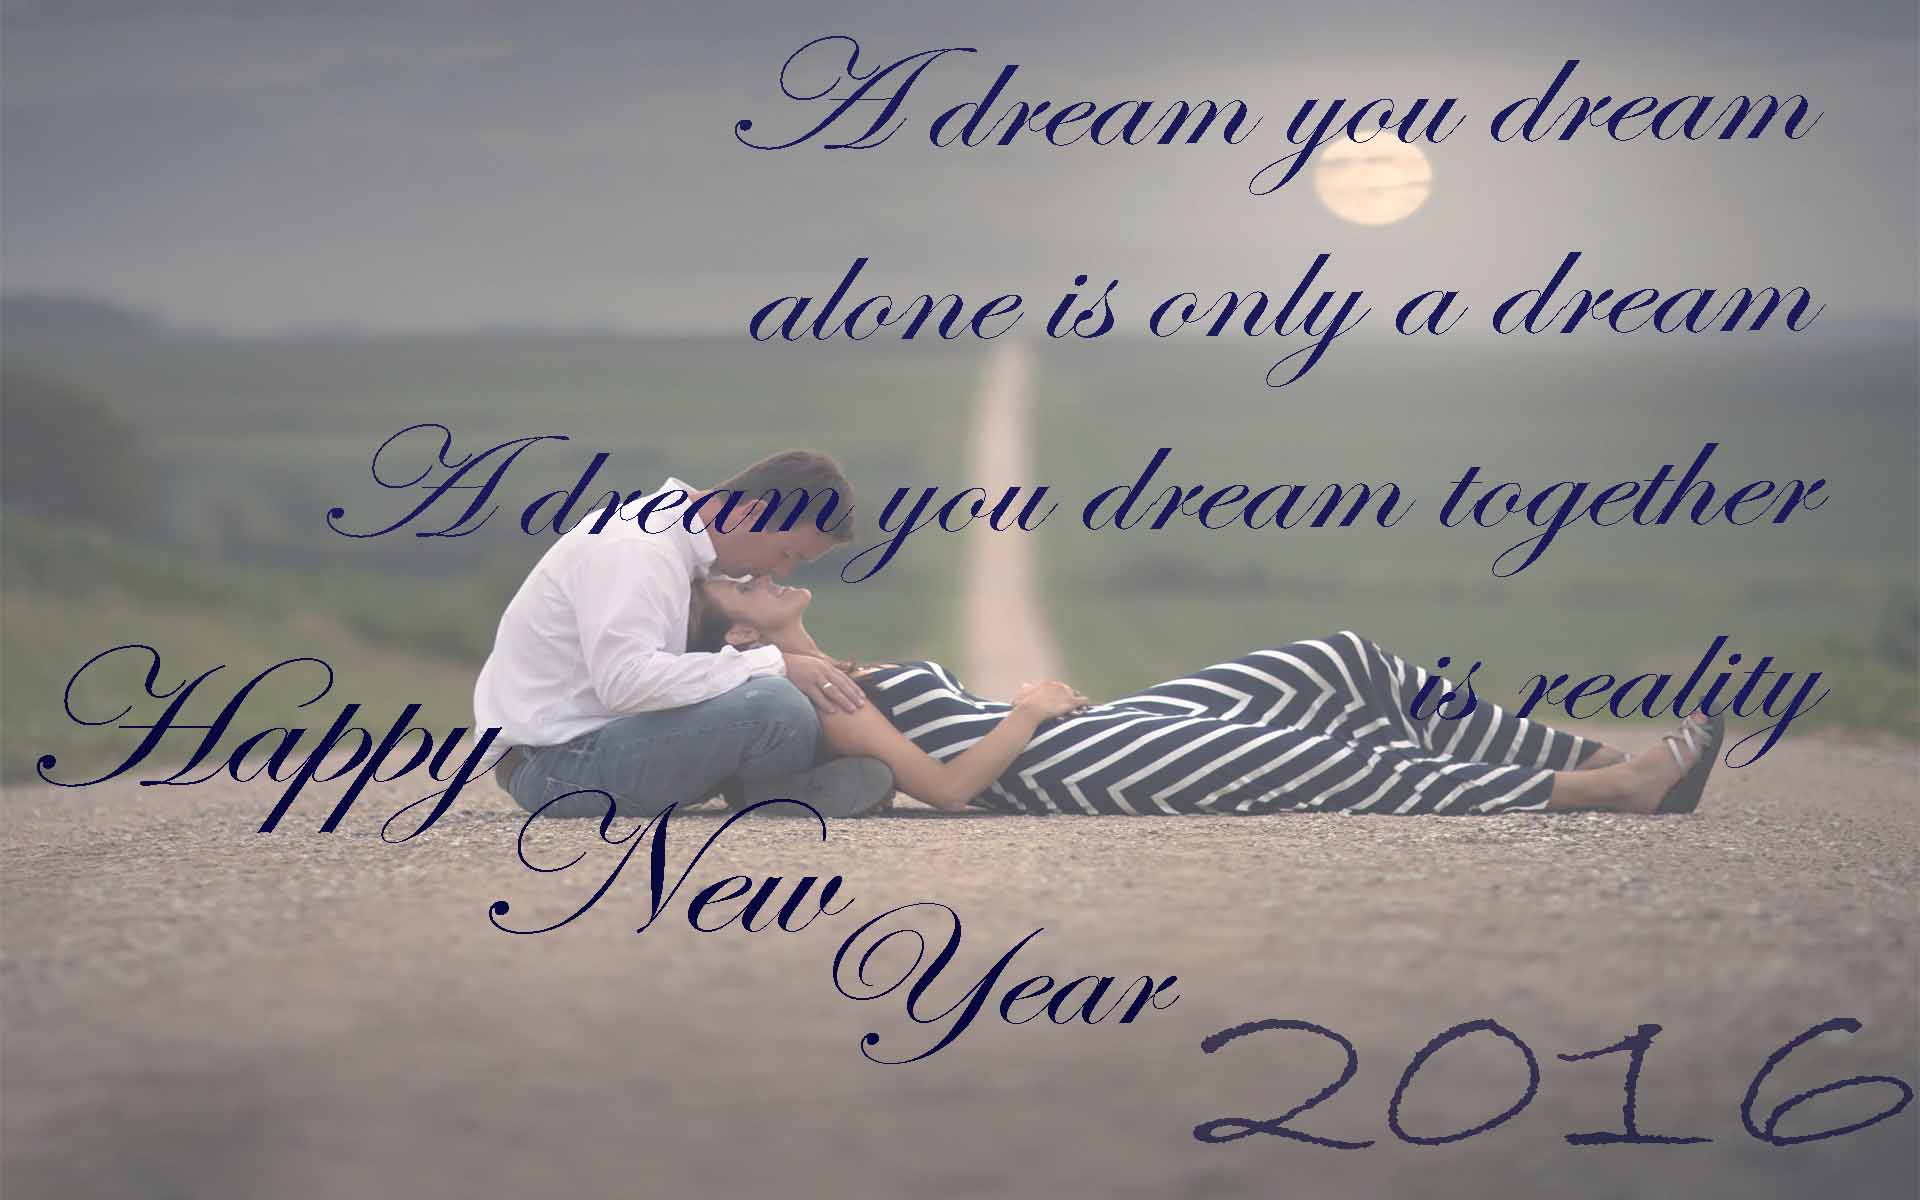 Happy New Year 2016 Wishes for lovers. Happy New Year 2016 SMS